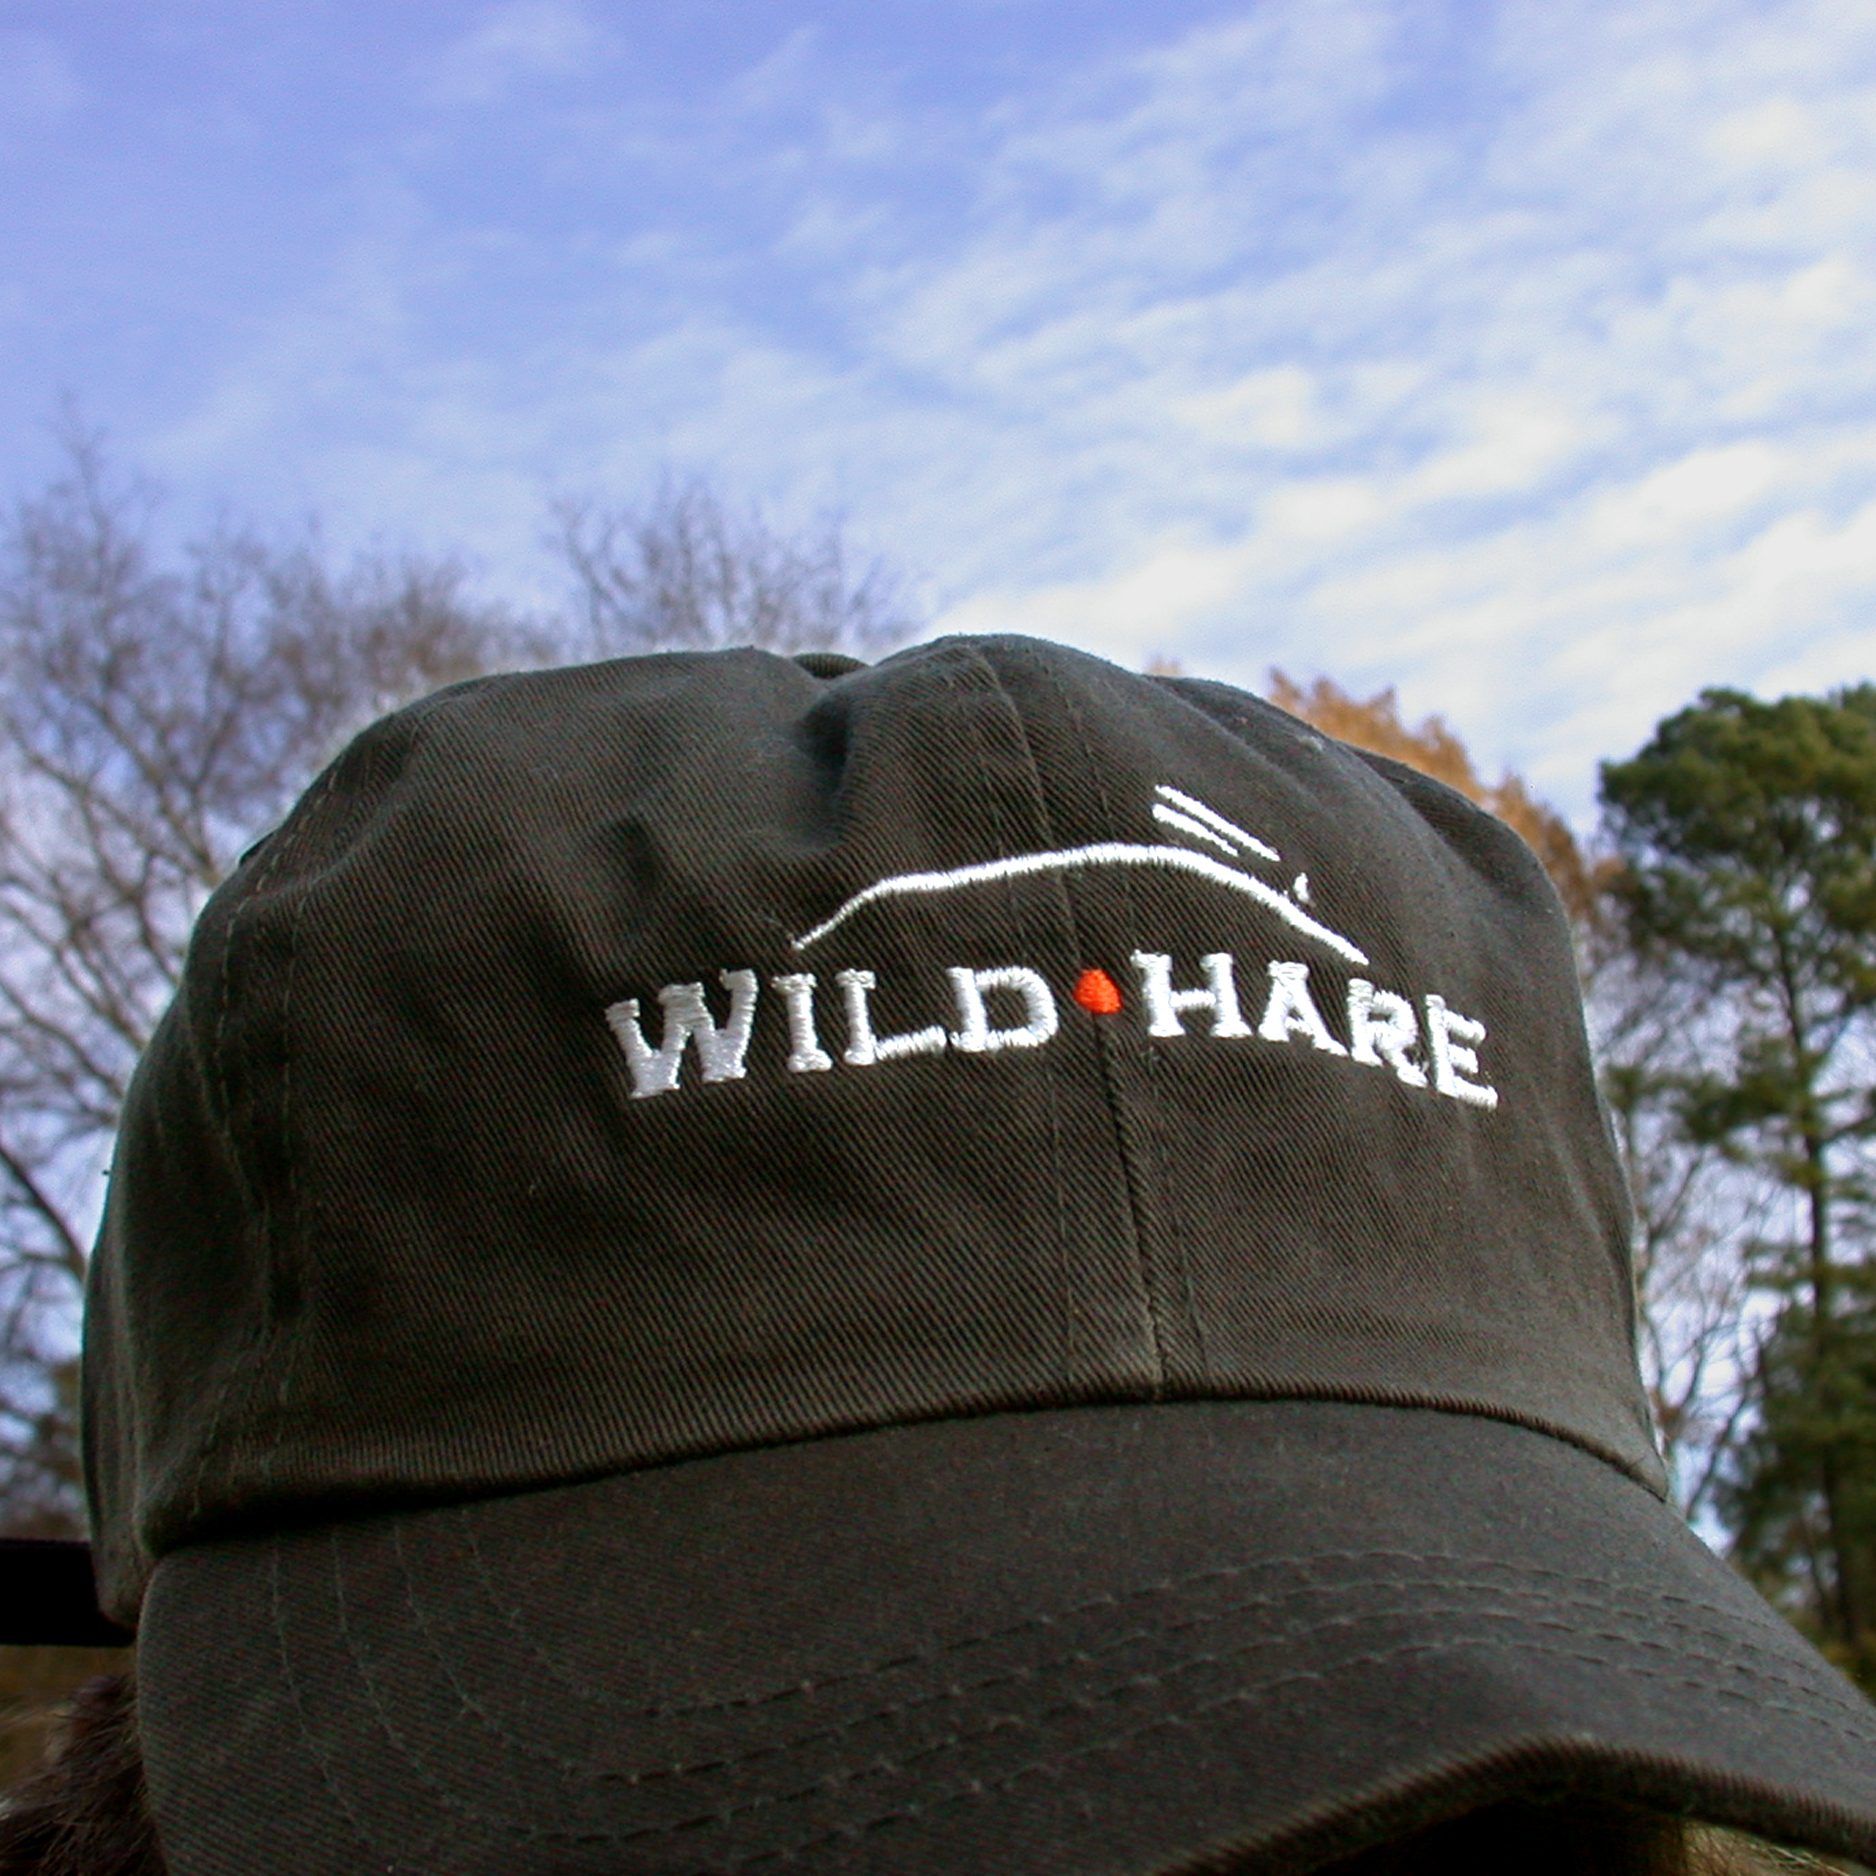  Wild•Hare International Wearables  Design, branding and creative direction by Chuck Mitchell 